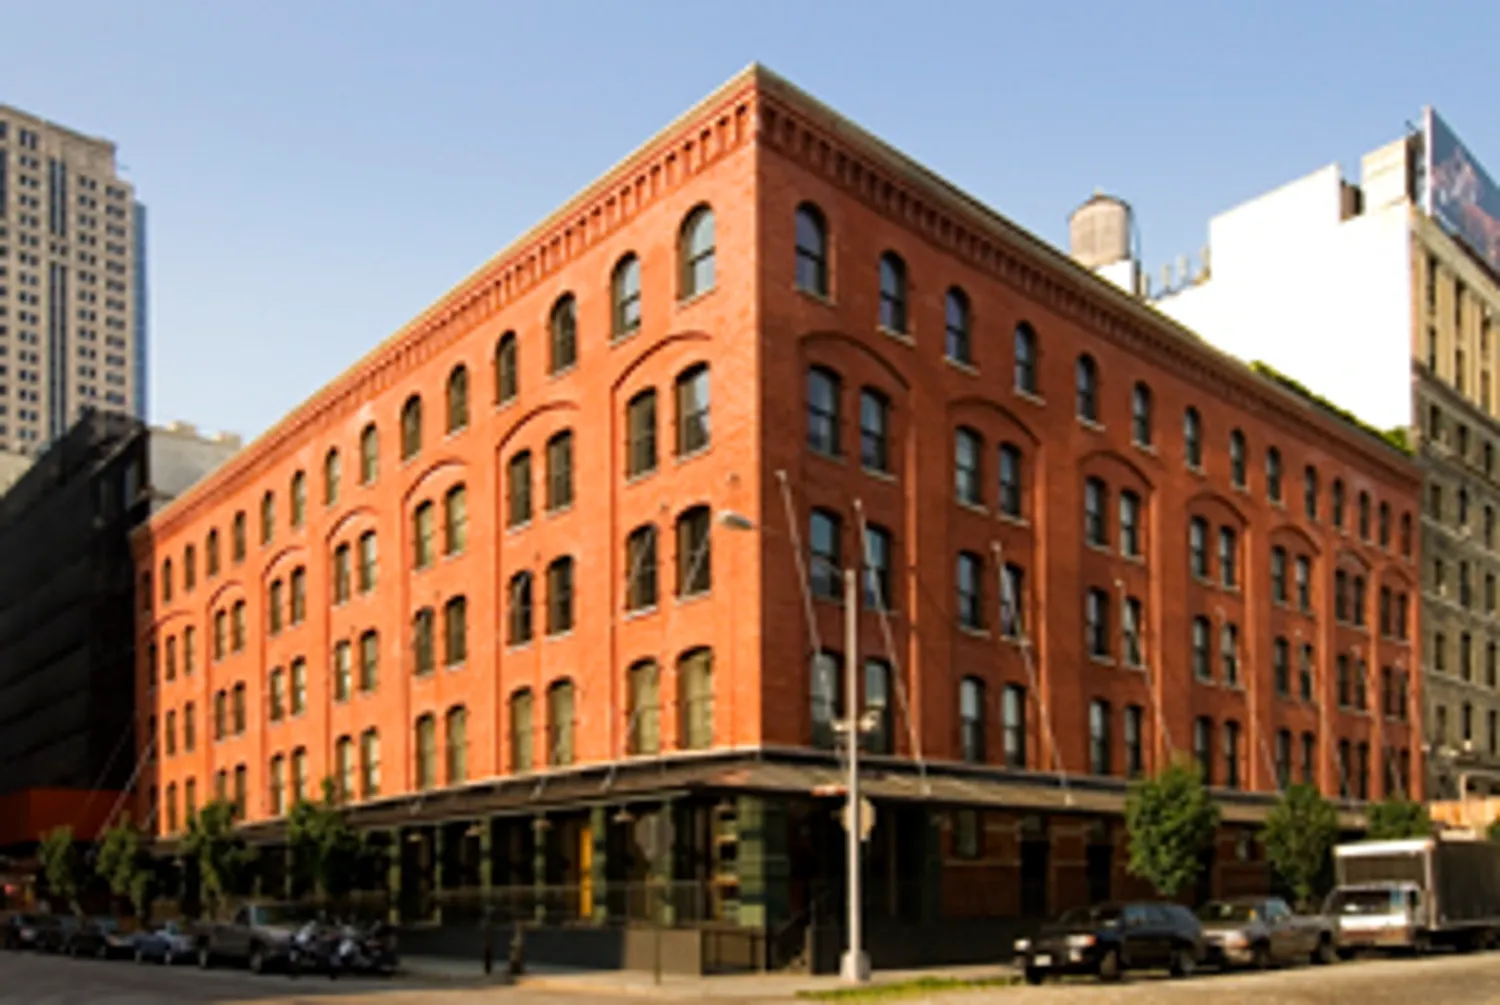 Historic integrity of an 1882 brick building 